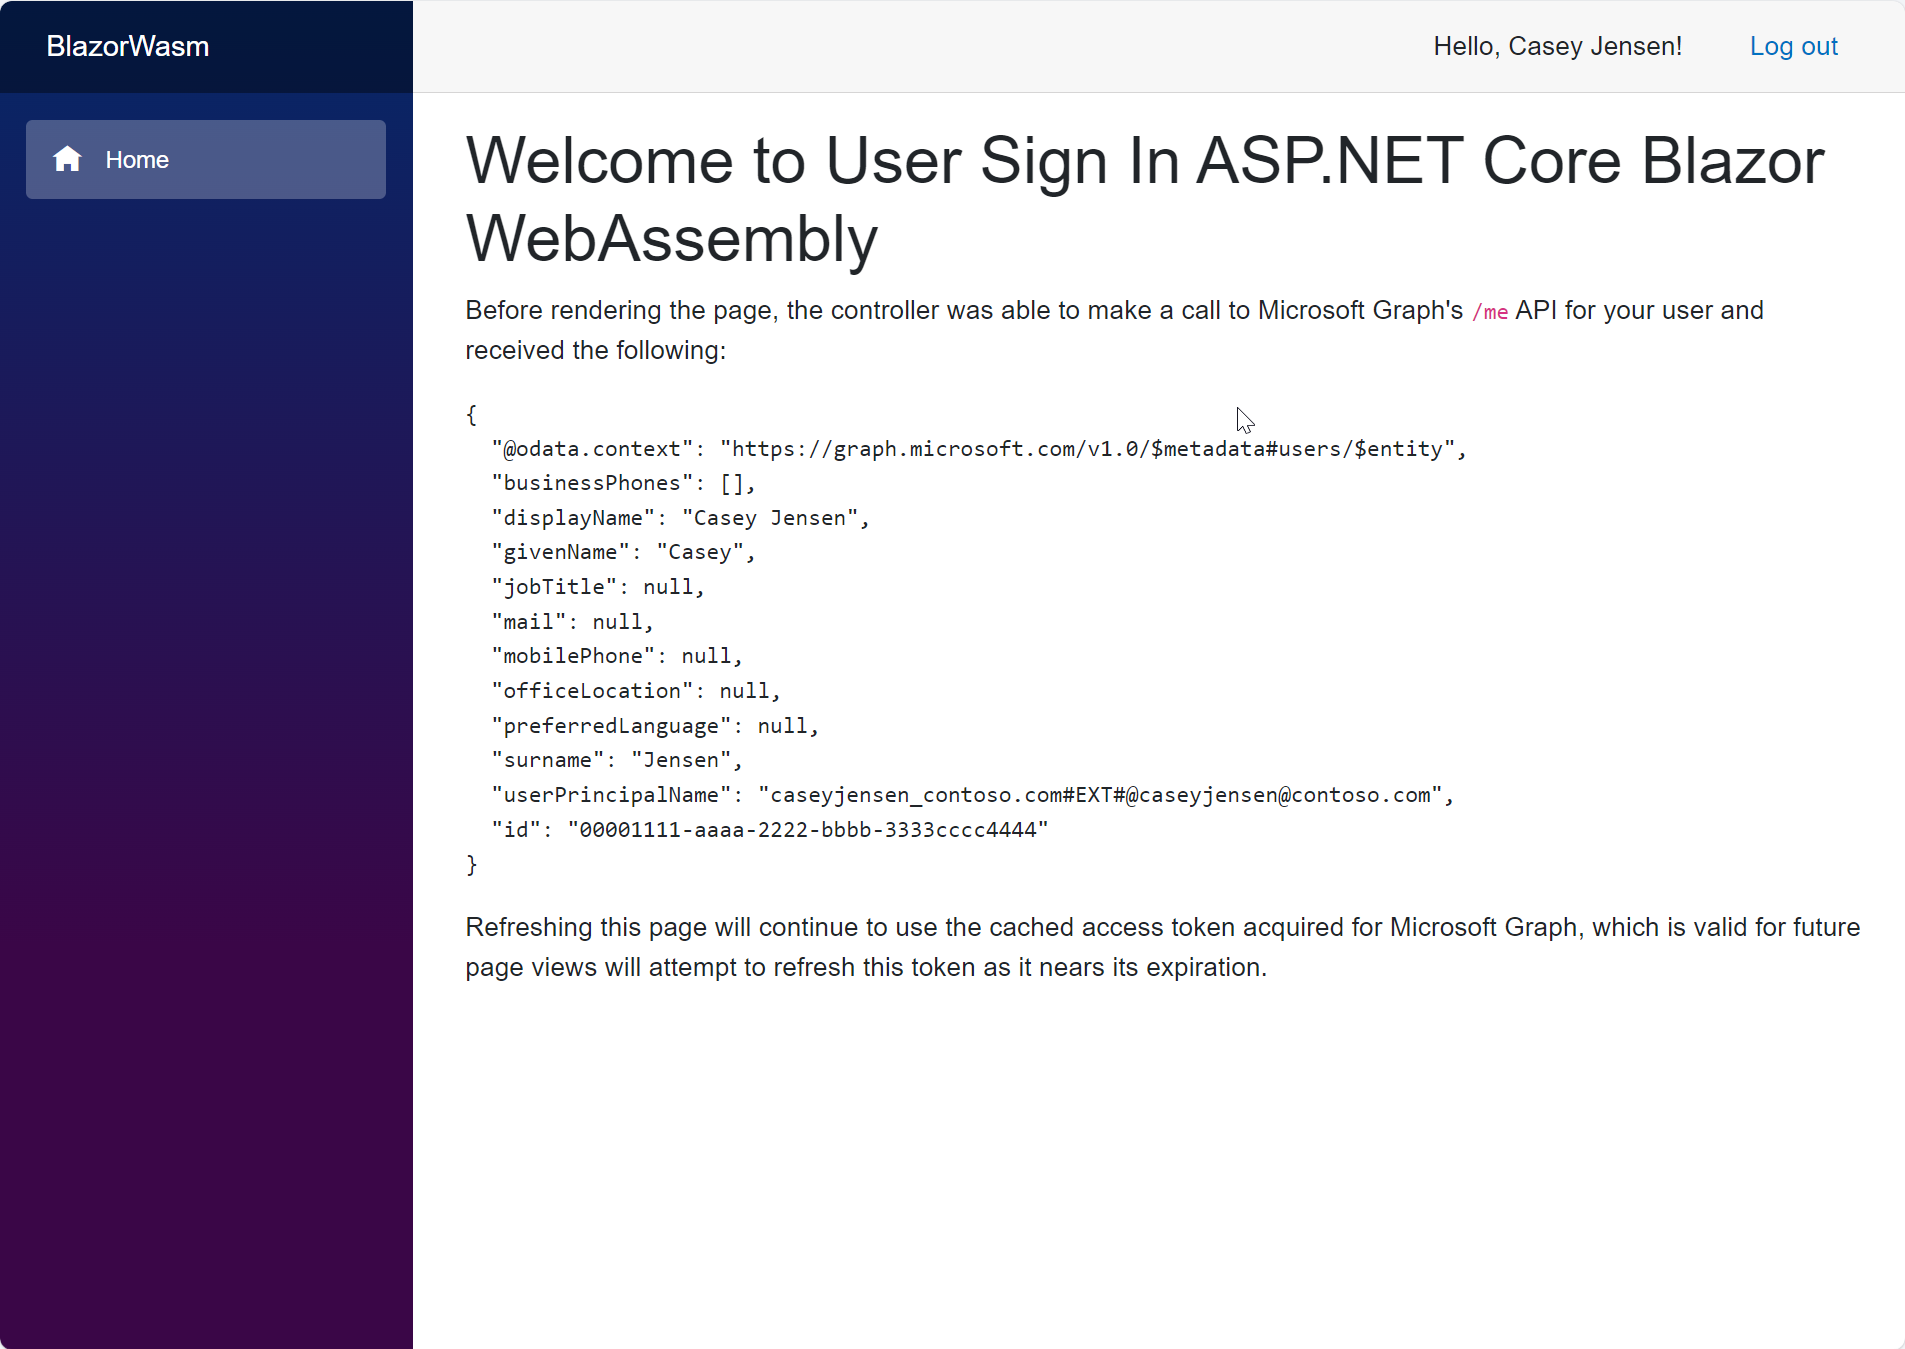 Screenshot of Blazor WASM SPA App depicting the results of the API call.